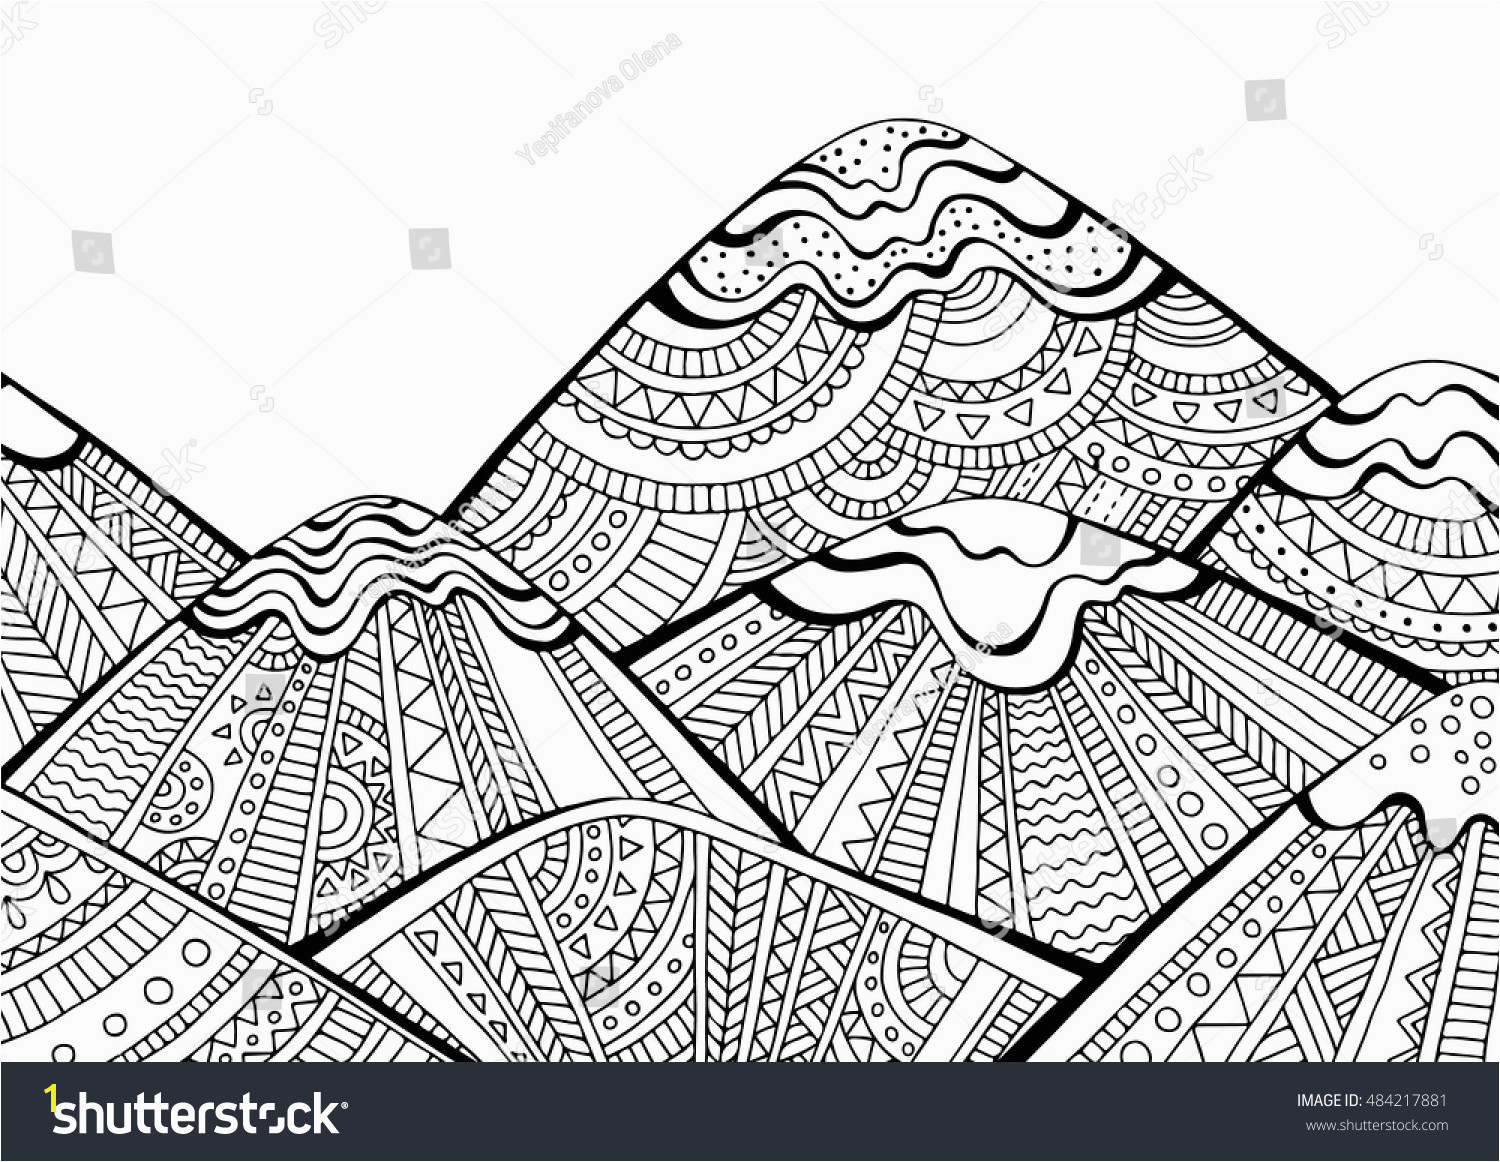 Printable coloring page for adults with mountain landscape Hand drawn vector illustration